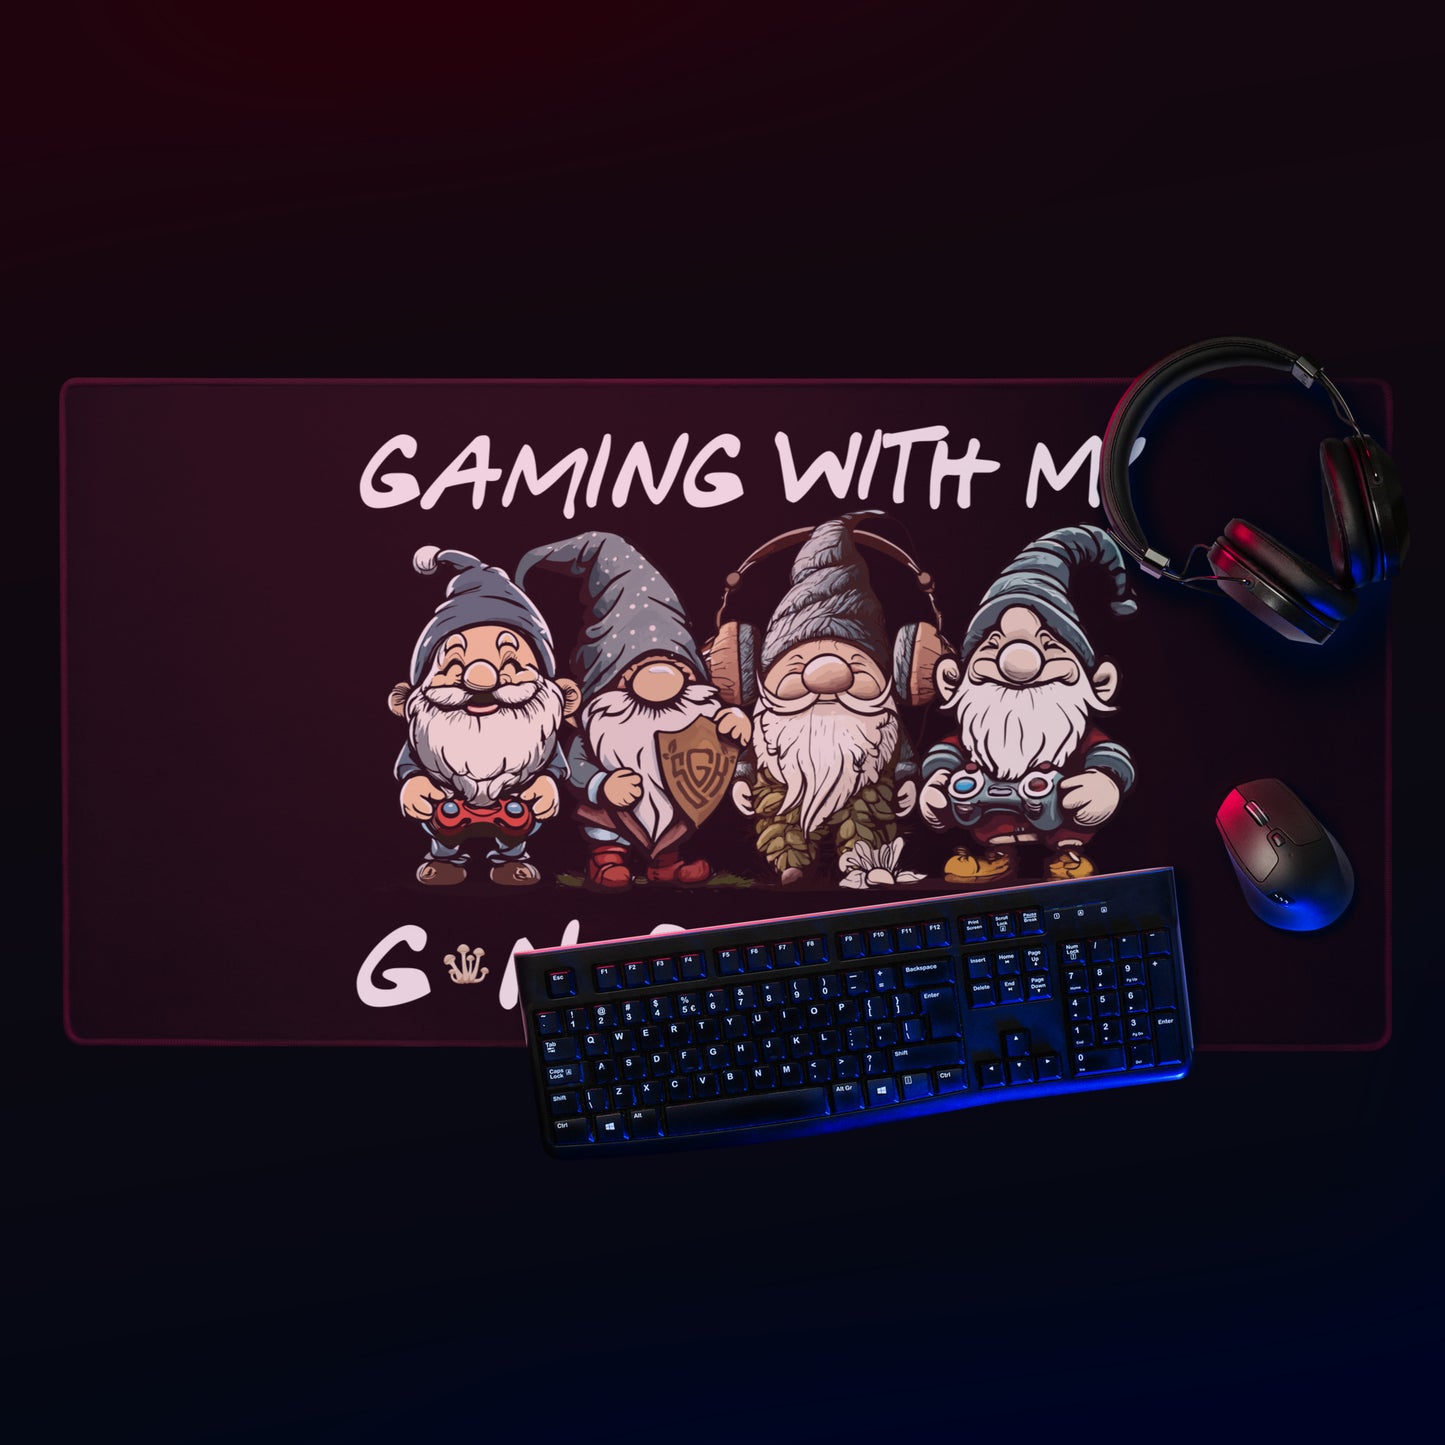 SGK Gaming with my Gnomies 36 x 18 Black Gaming mouse pad